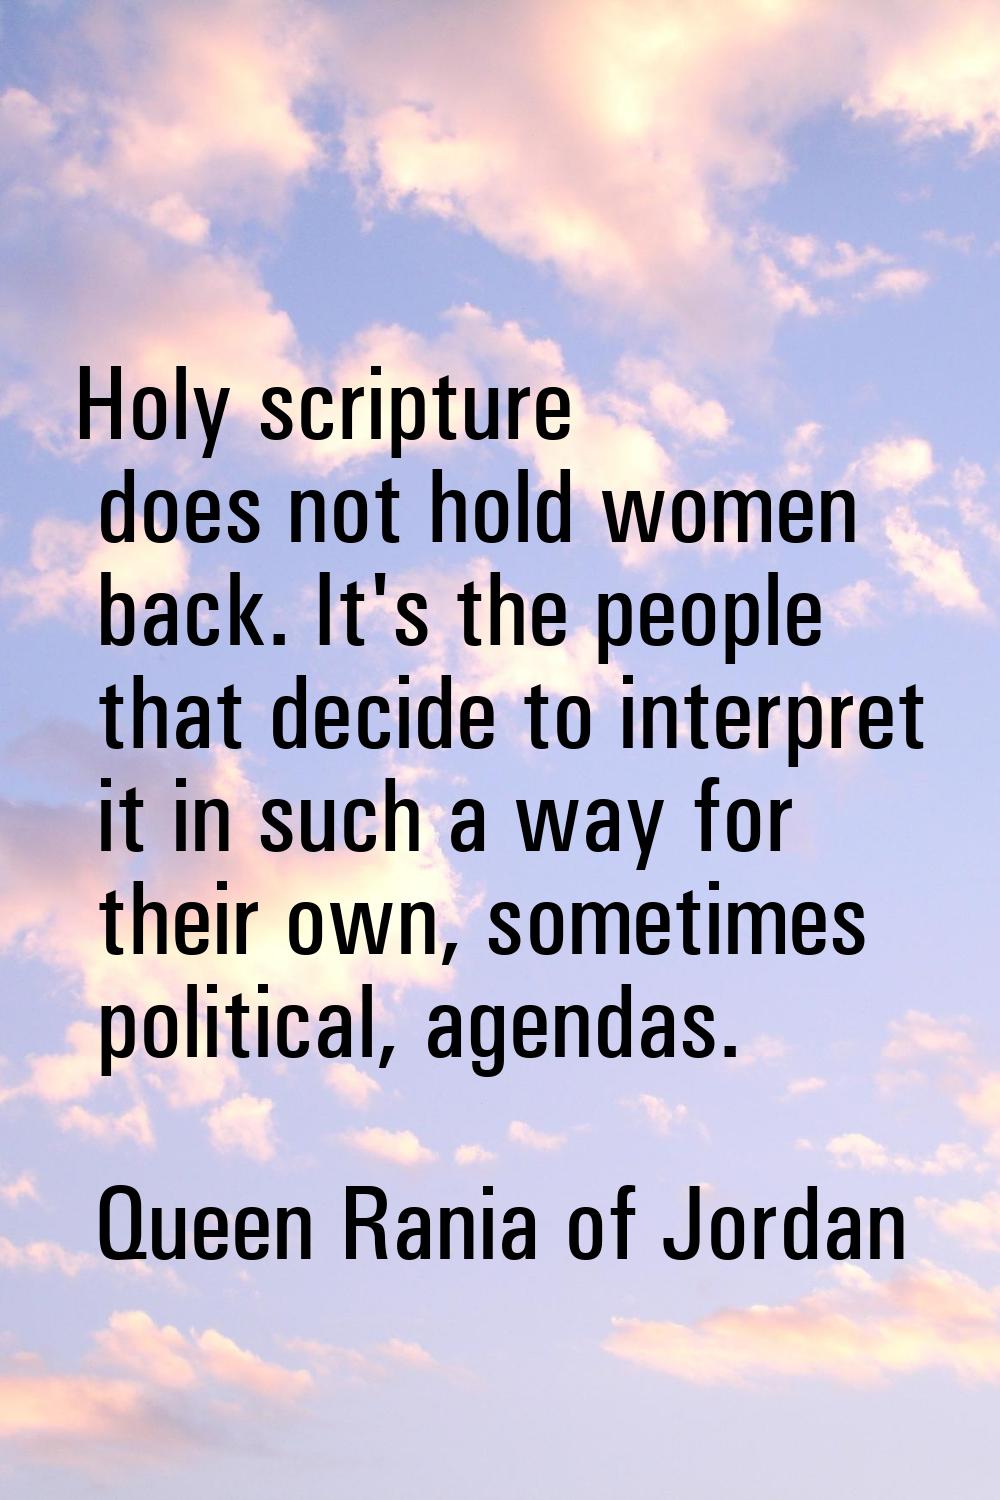 Holy scripture does not hold women back. It's the people that decide to interpret it in such a way 